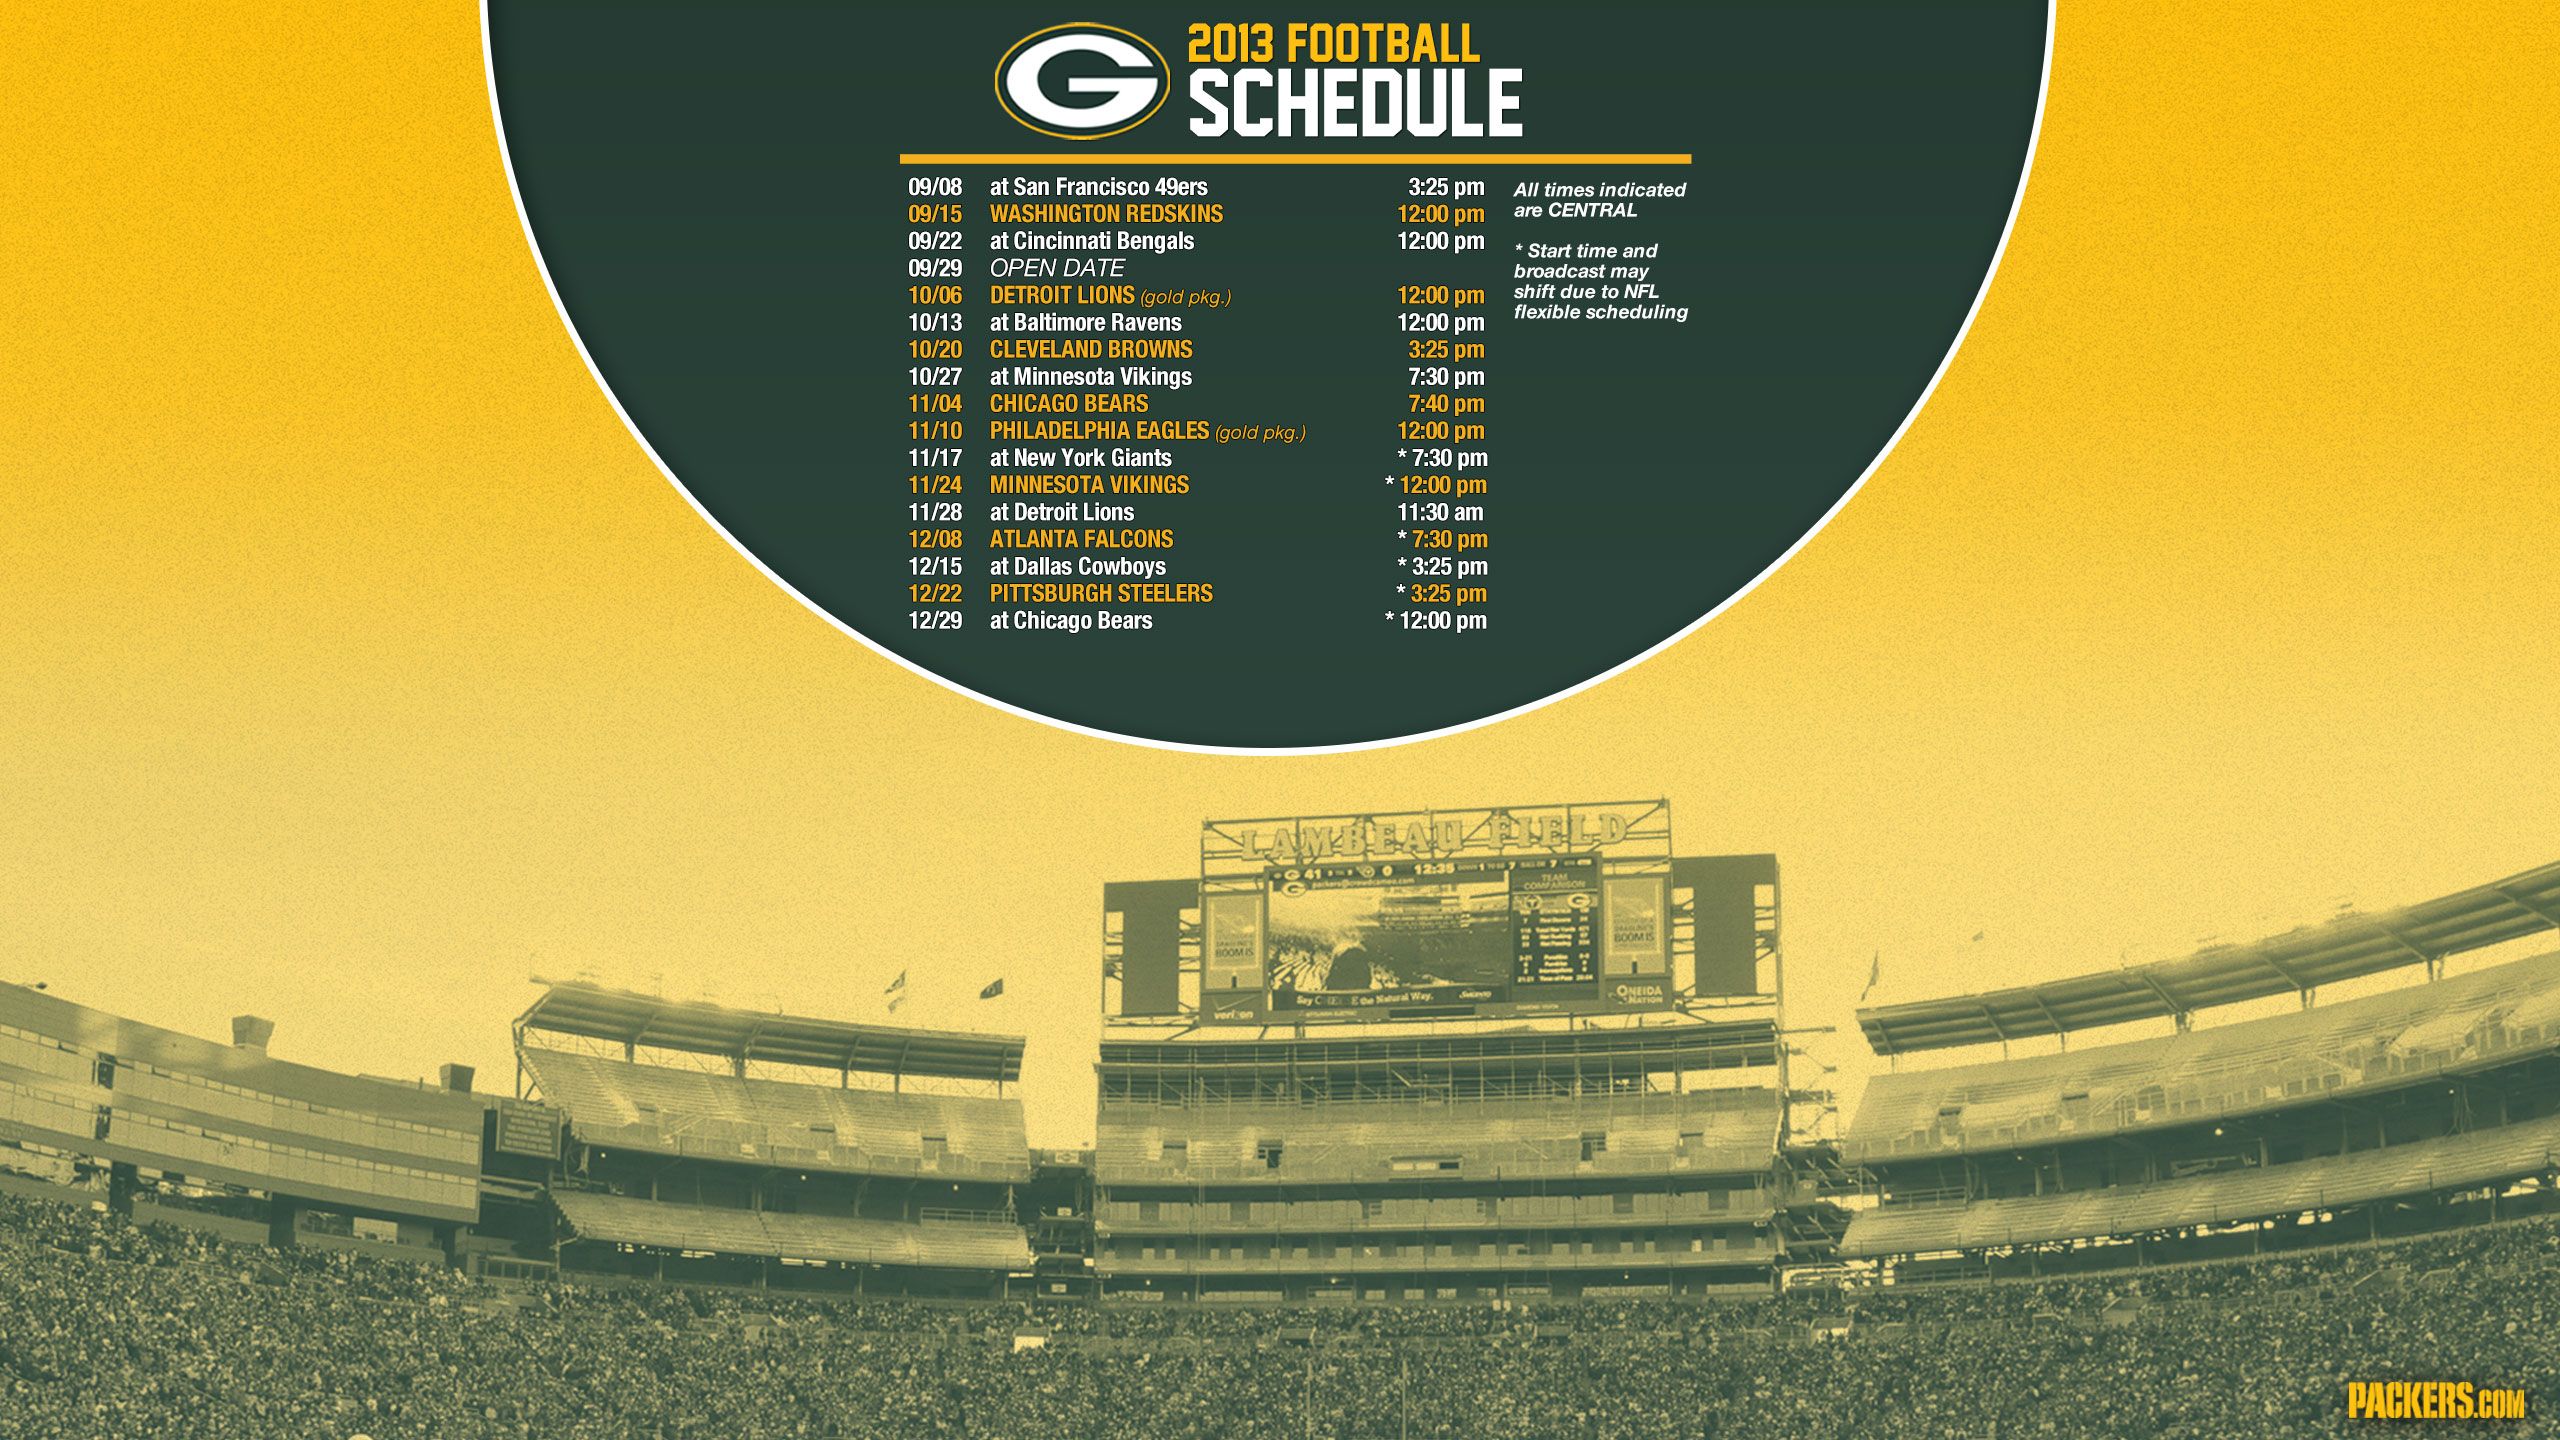 Packers.com Wallpapers 2013 Miscellaneous